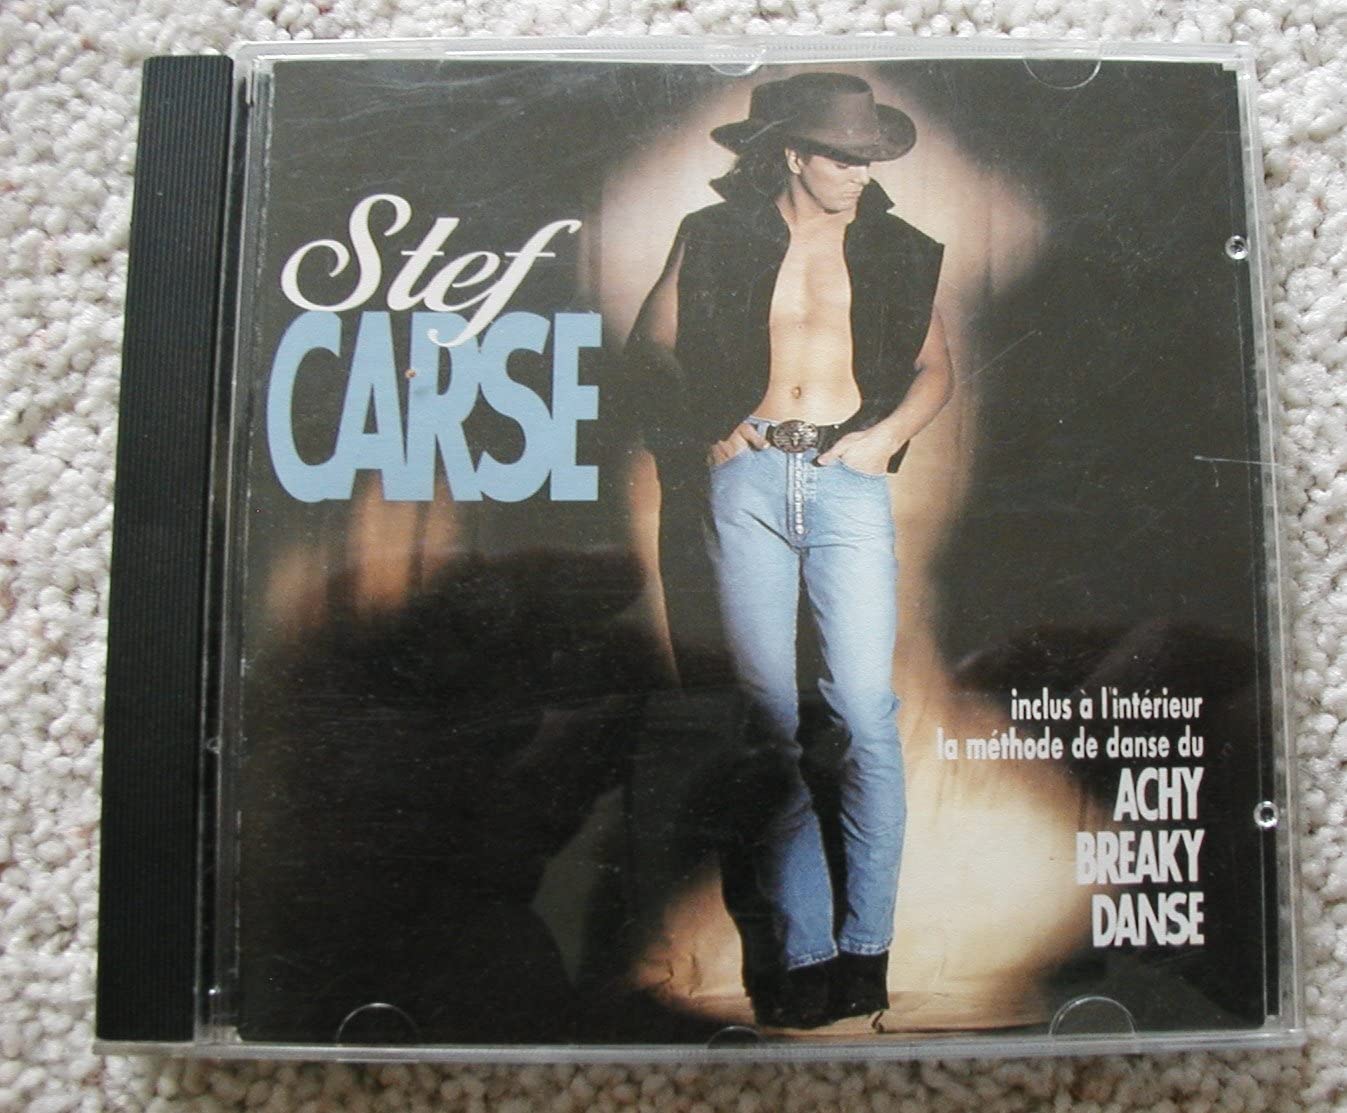 Achy Breaky Heart [Audio CD] Stef Carse